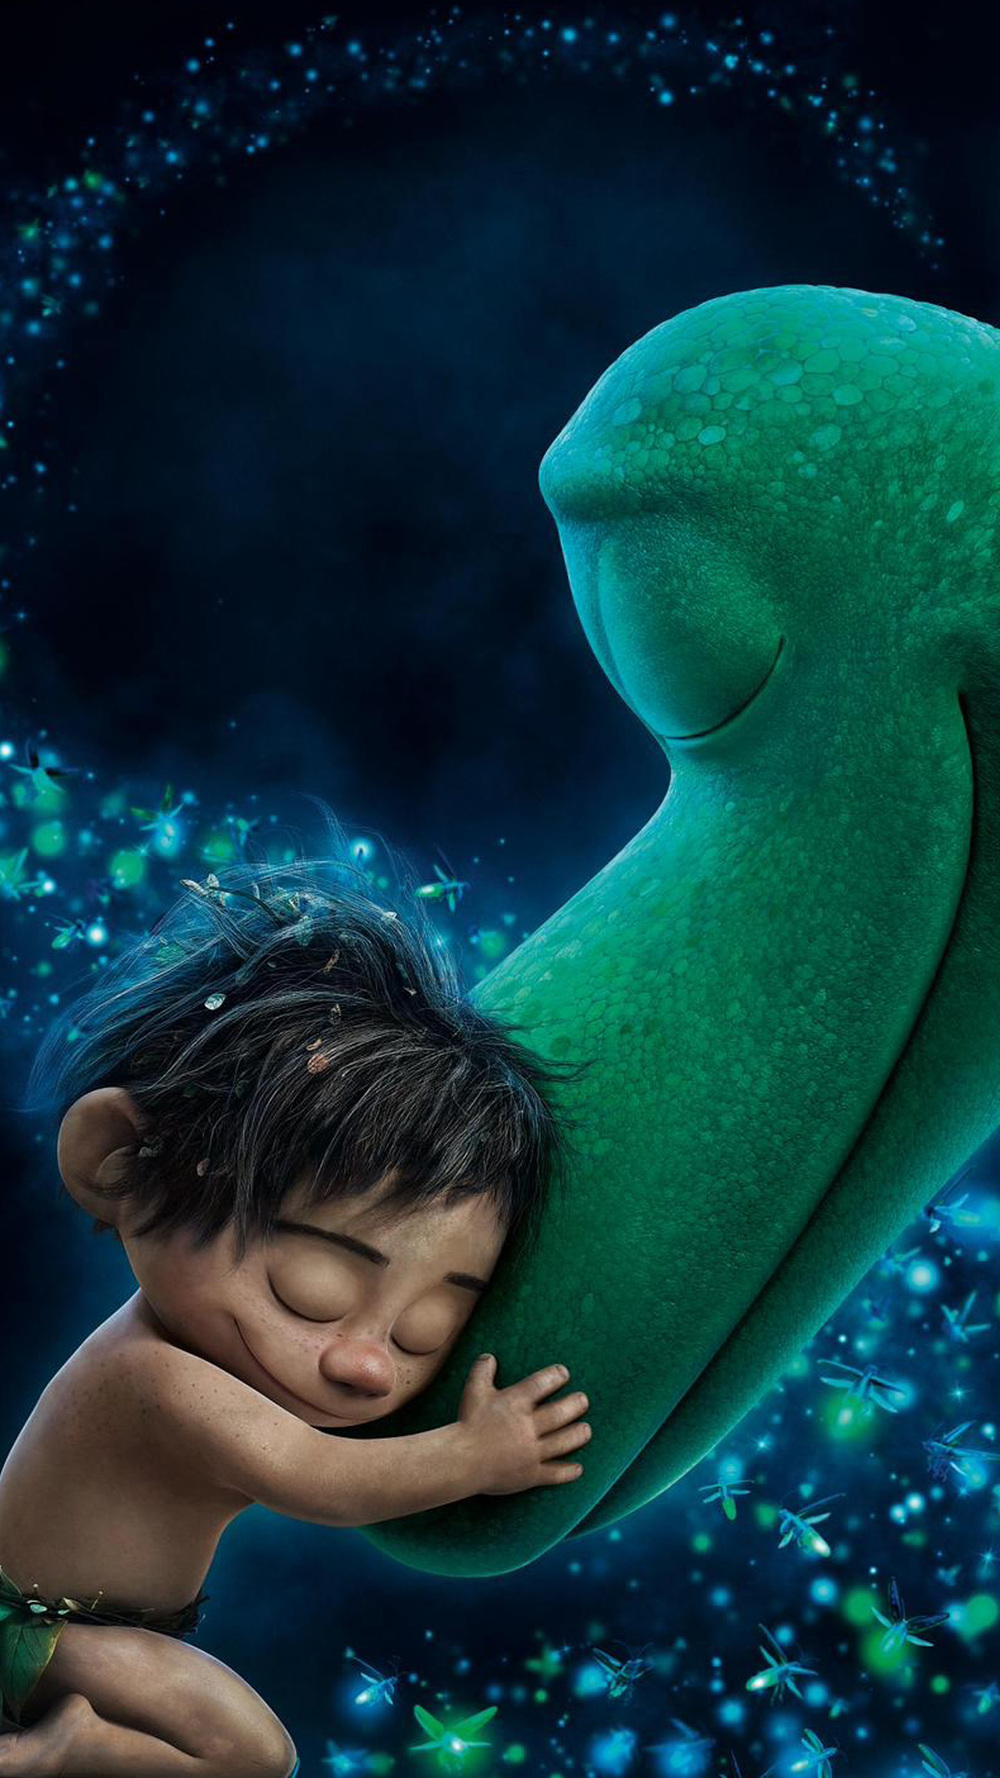 The Good Dinosaur: Downloadable Wallpaper for iOS ...